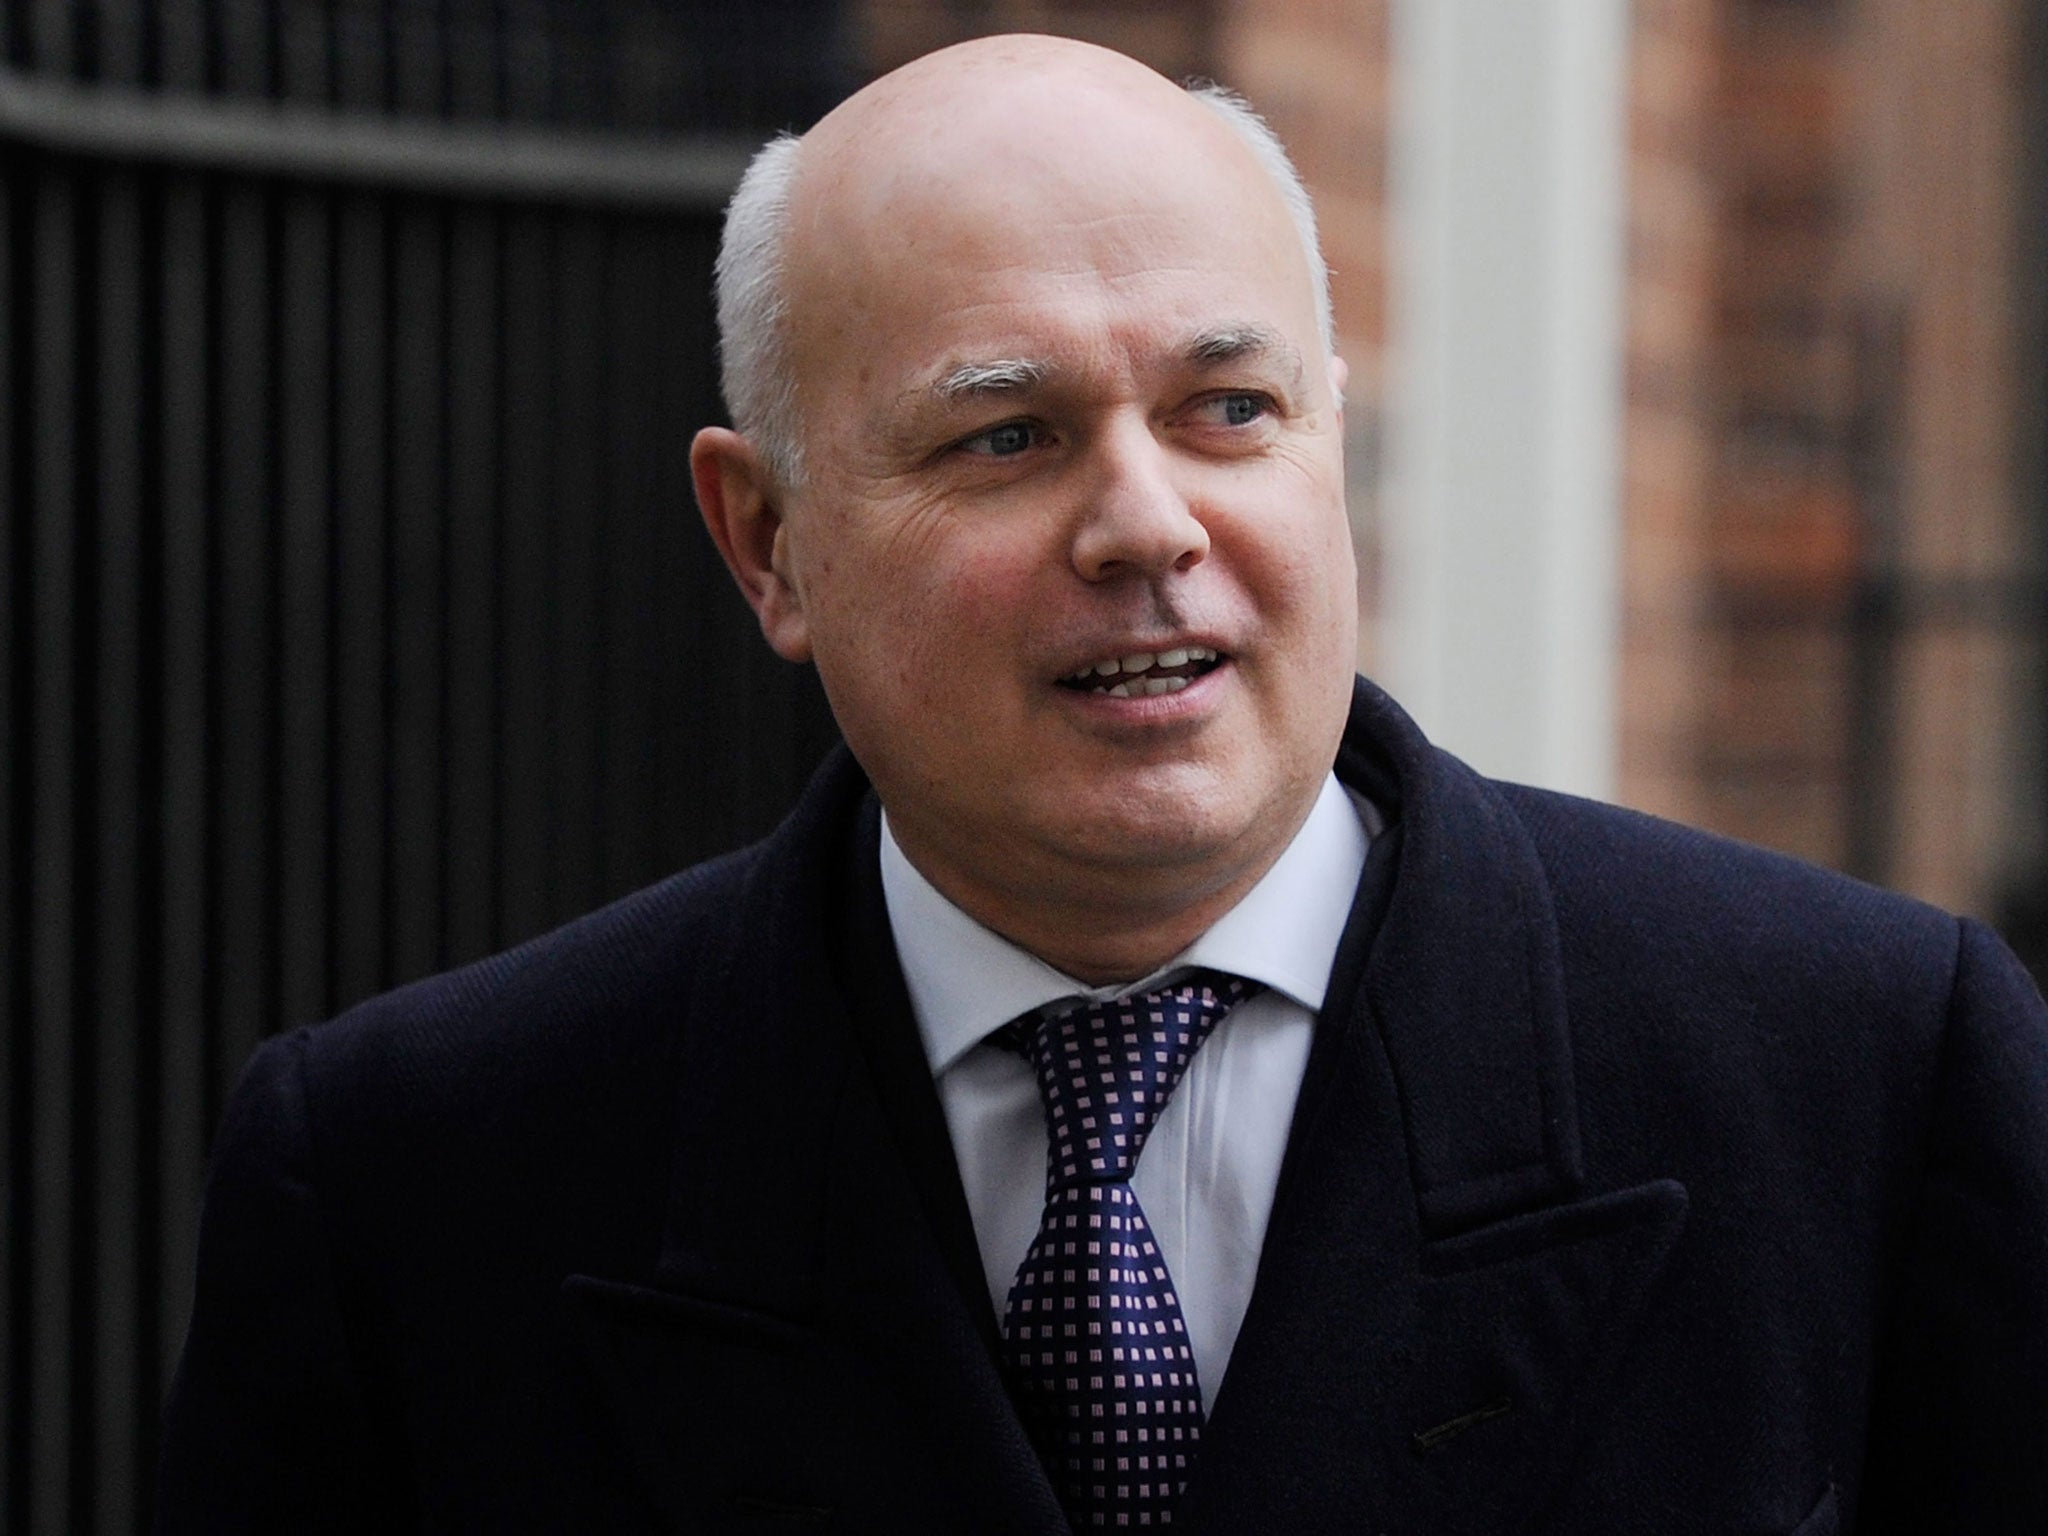 Iain Duncan Smith, the Work and Pension Secretary, says he could get by on £53 a week